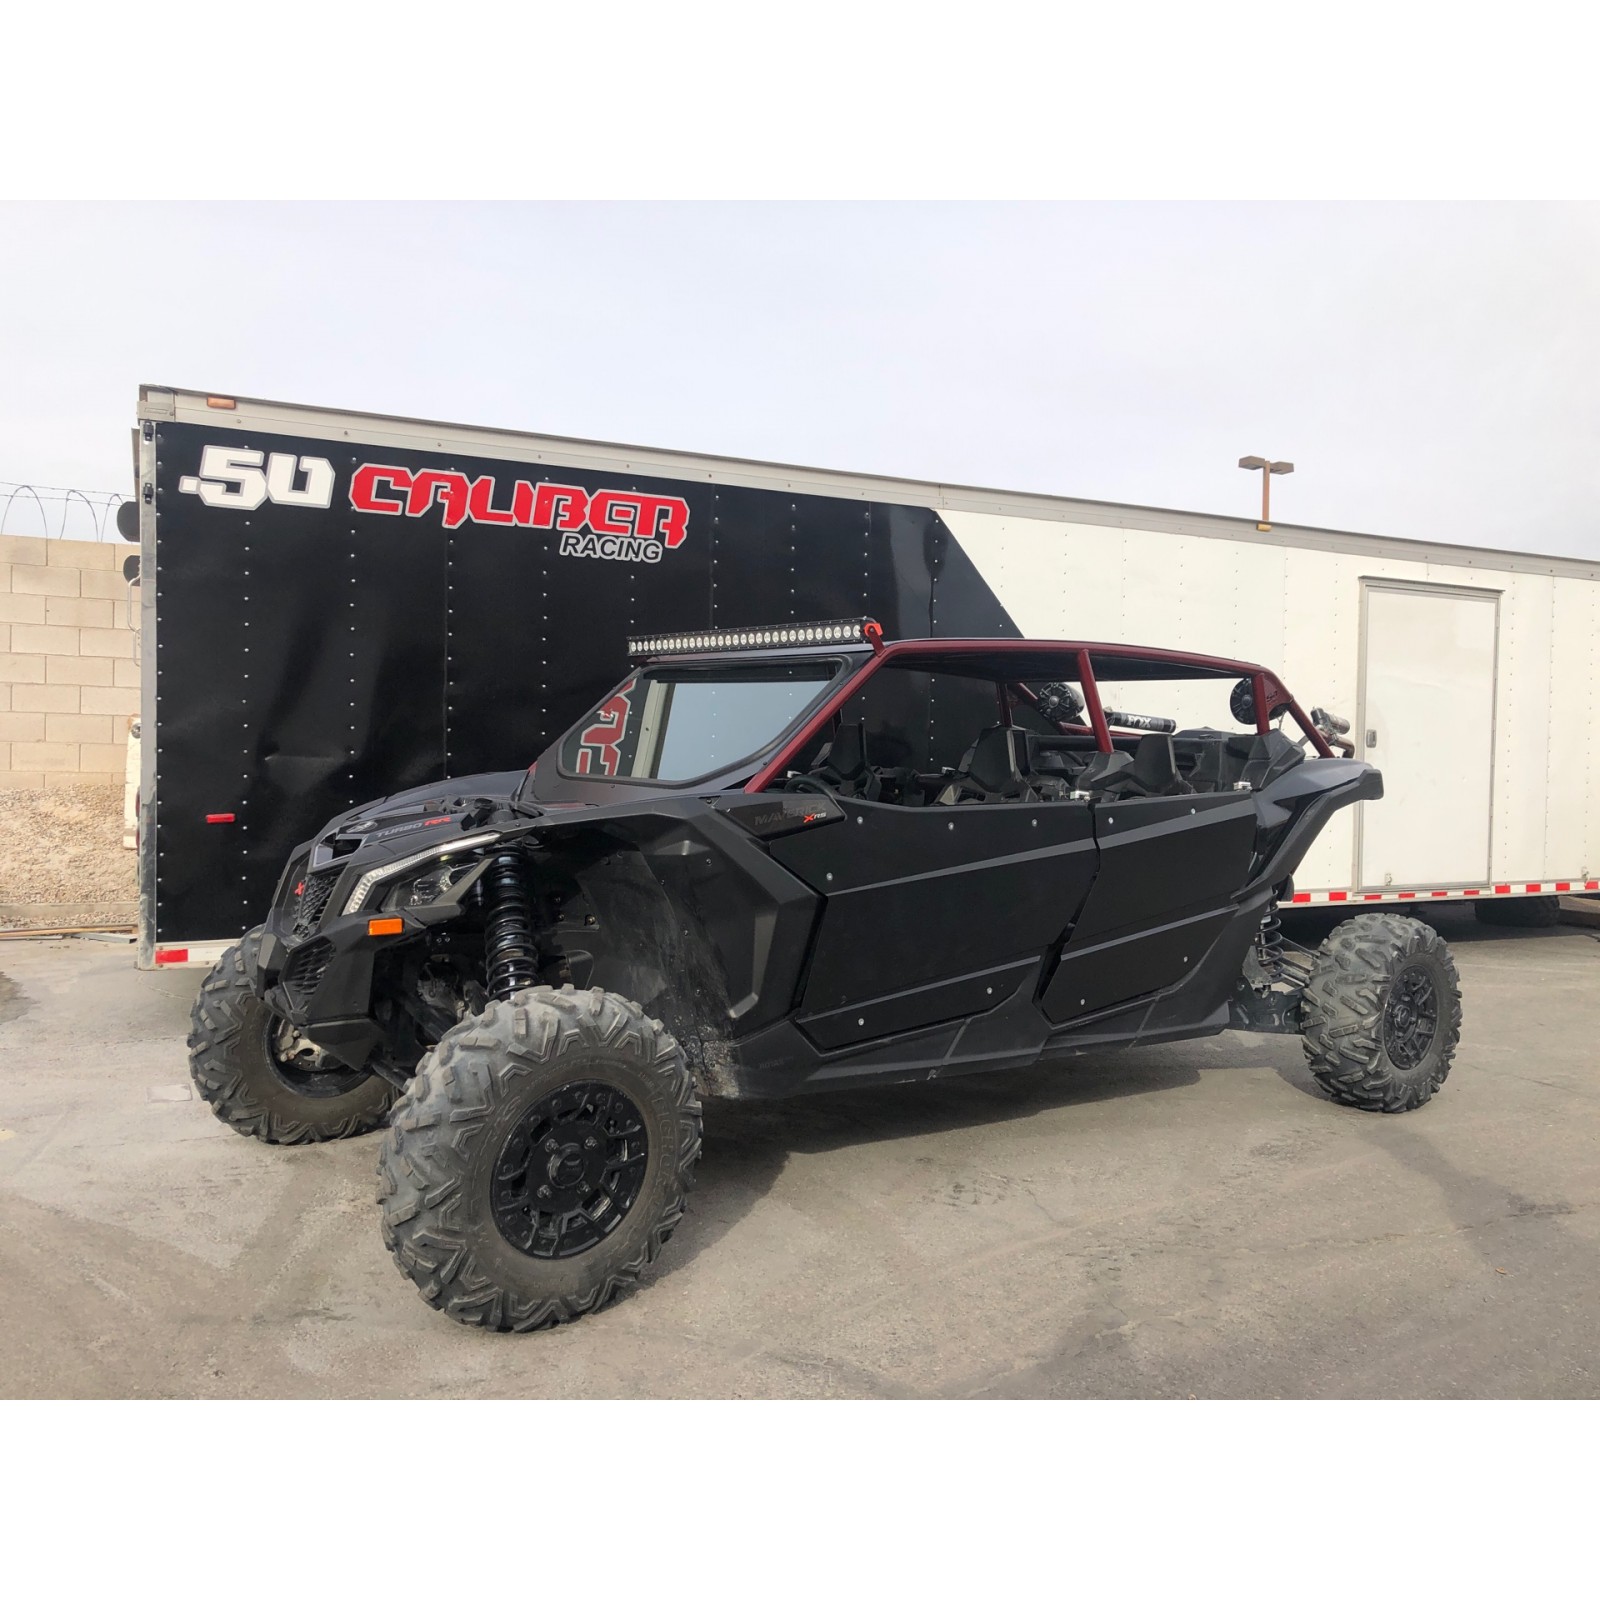 Can-am X3 Roll Cage Xrs 4 seater Radius Cage What Size Trailer For Can-am X3 4 Seater